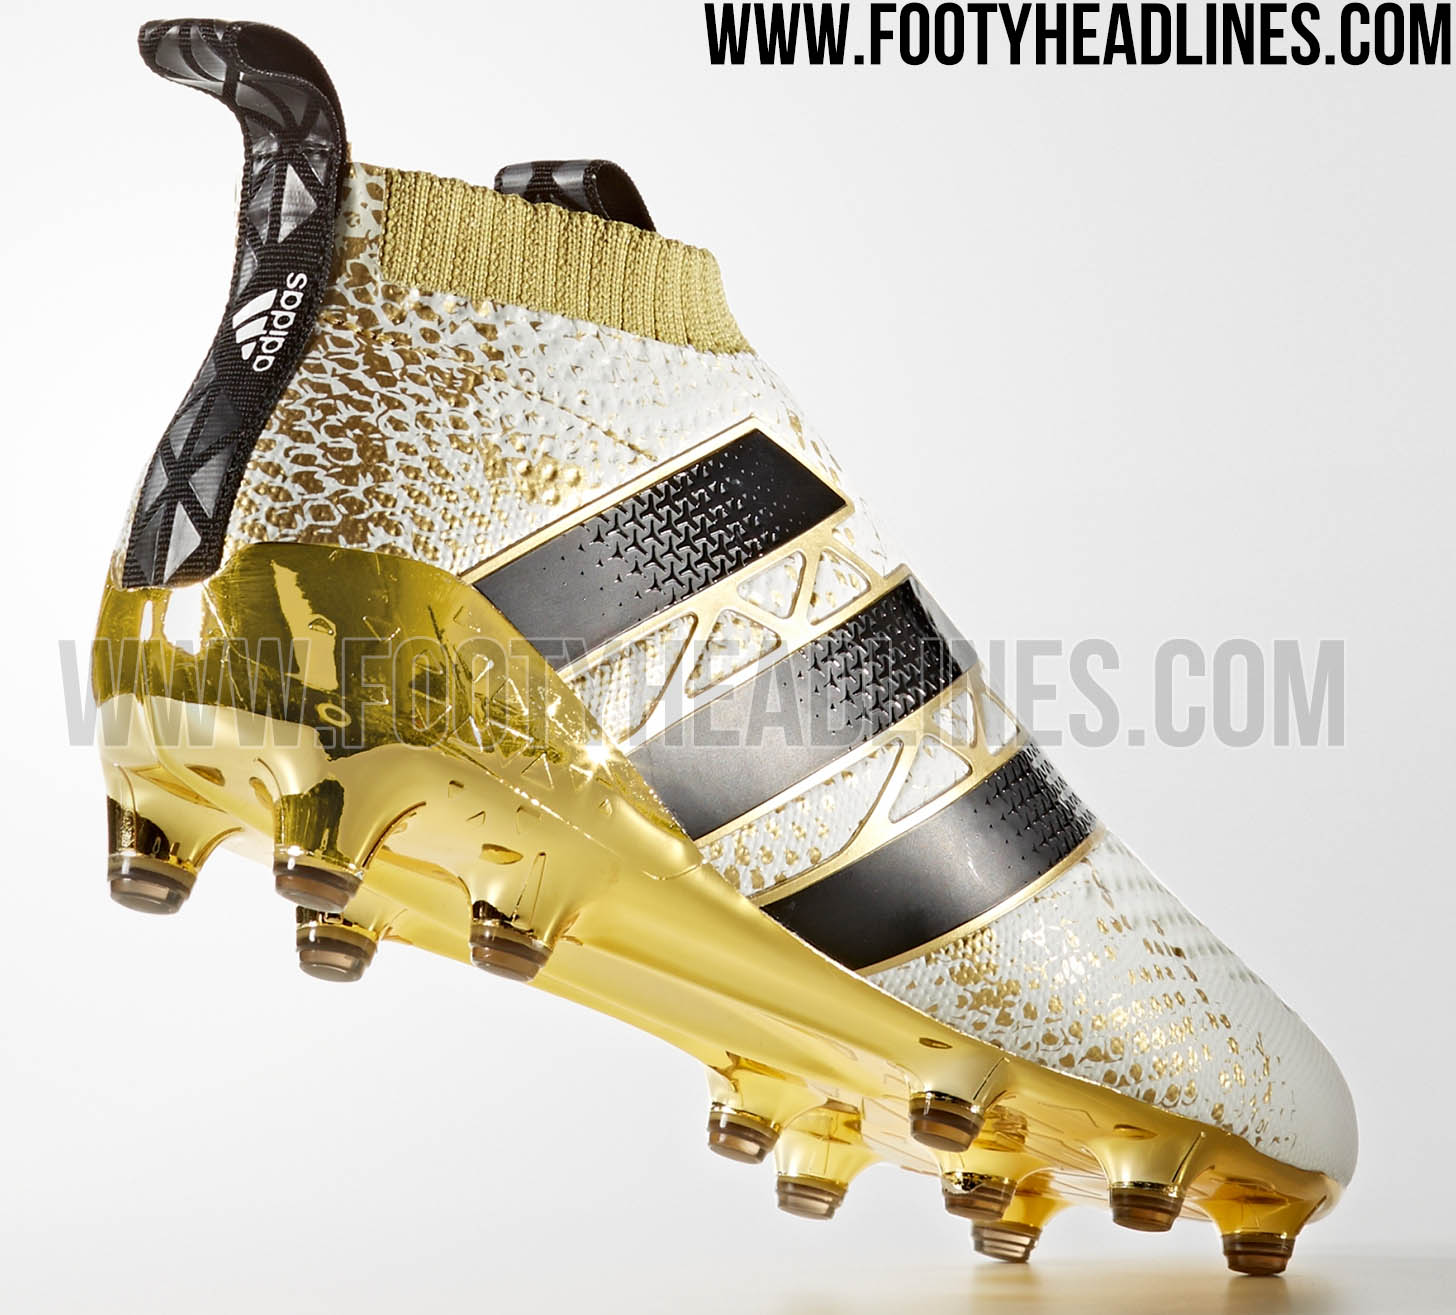 / Gold Adidas Ace 16+ PureControl Stellar Pack Boots Released Footy Headlines